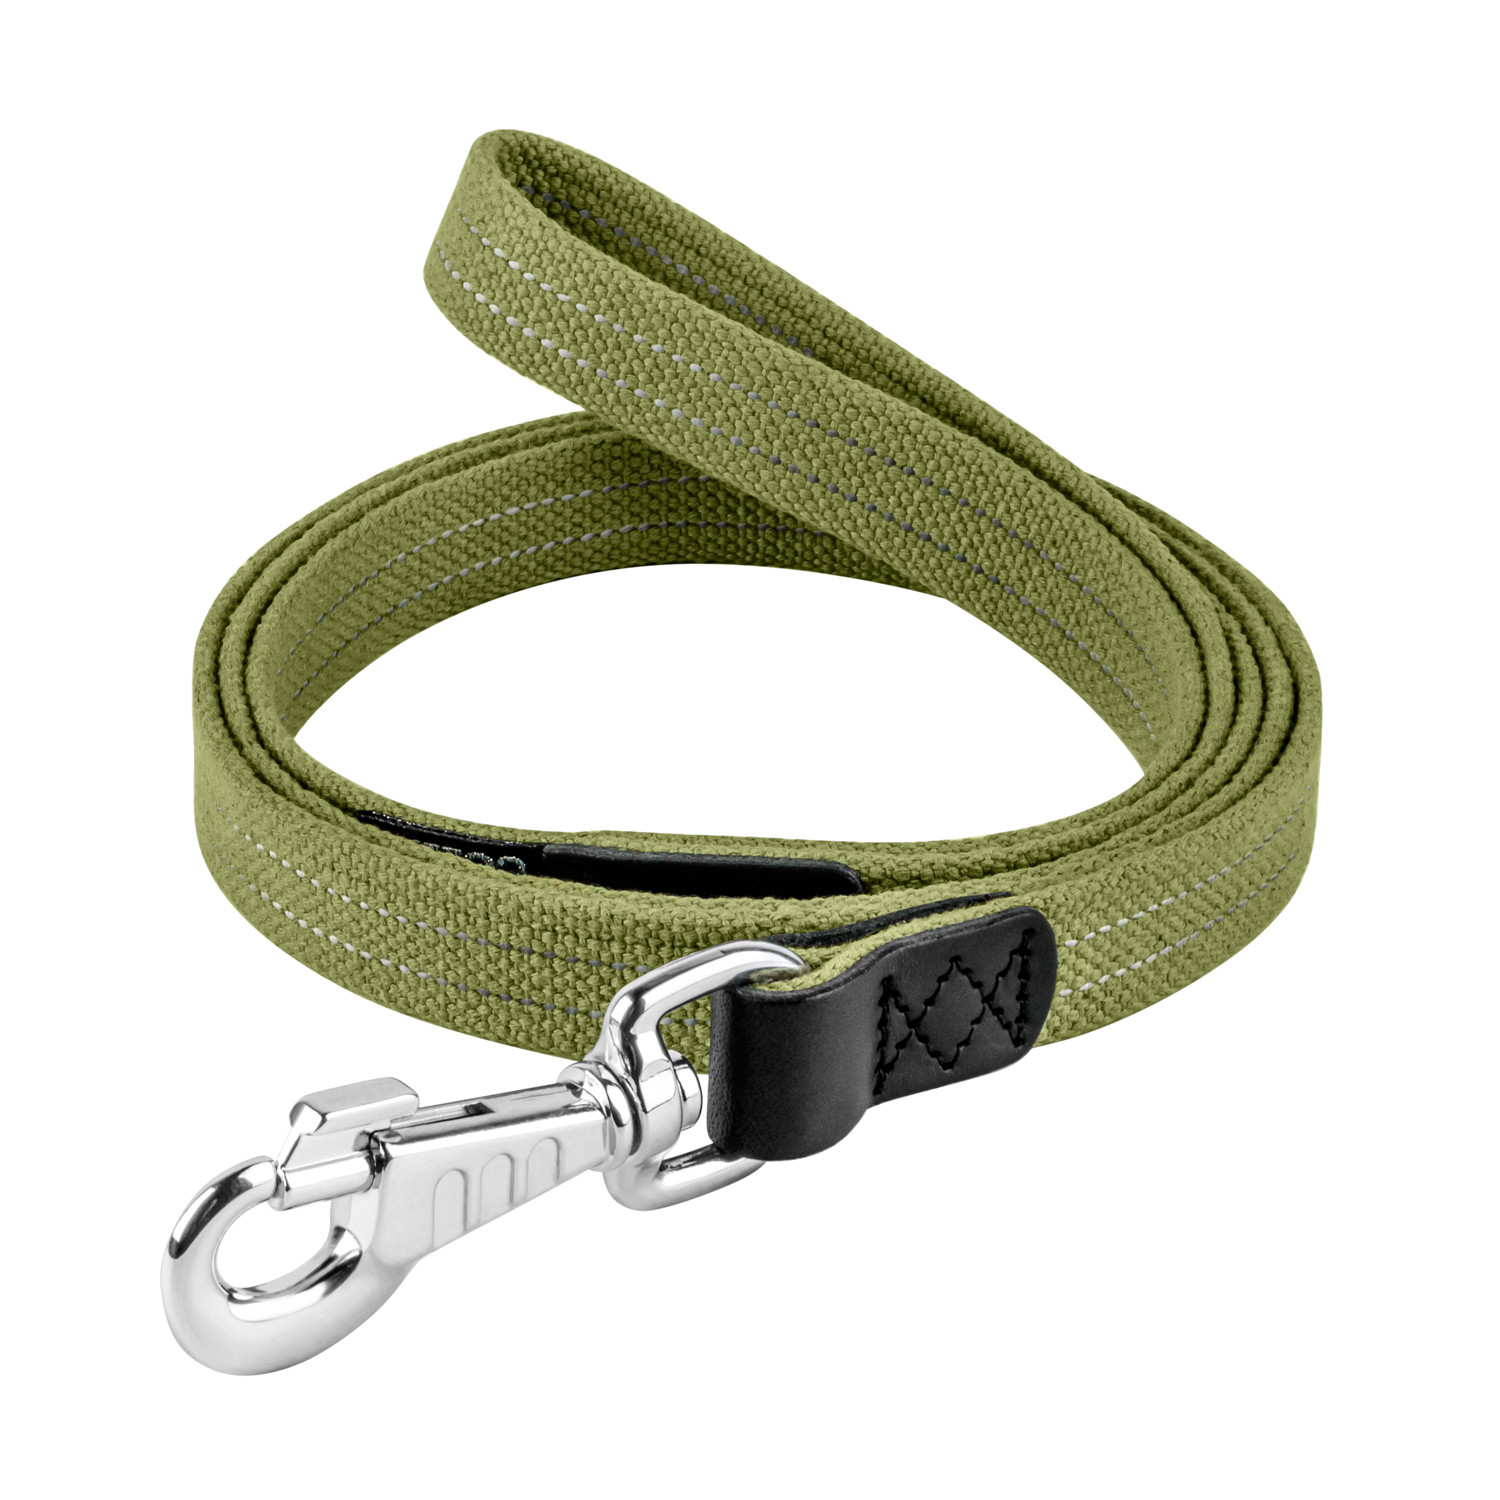 Canvas leashes